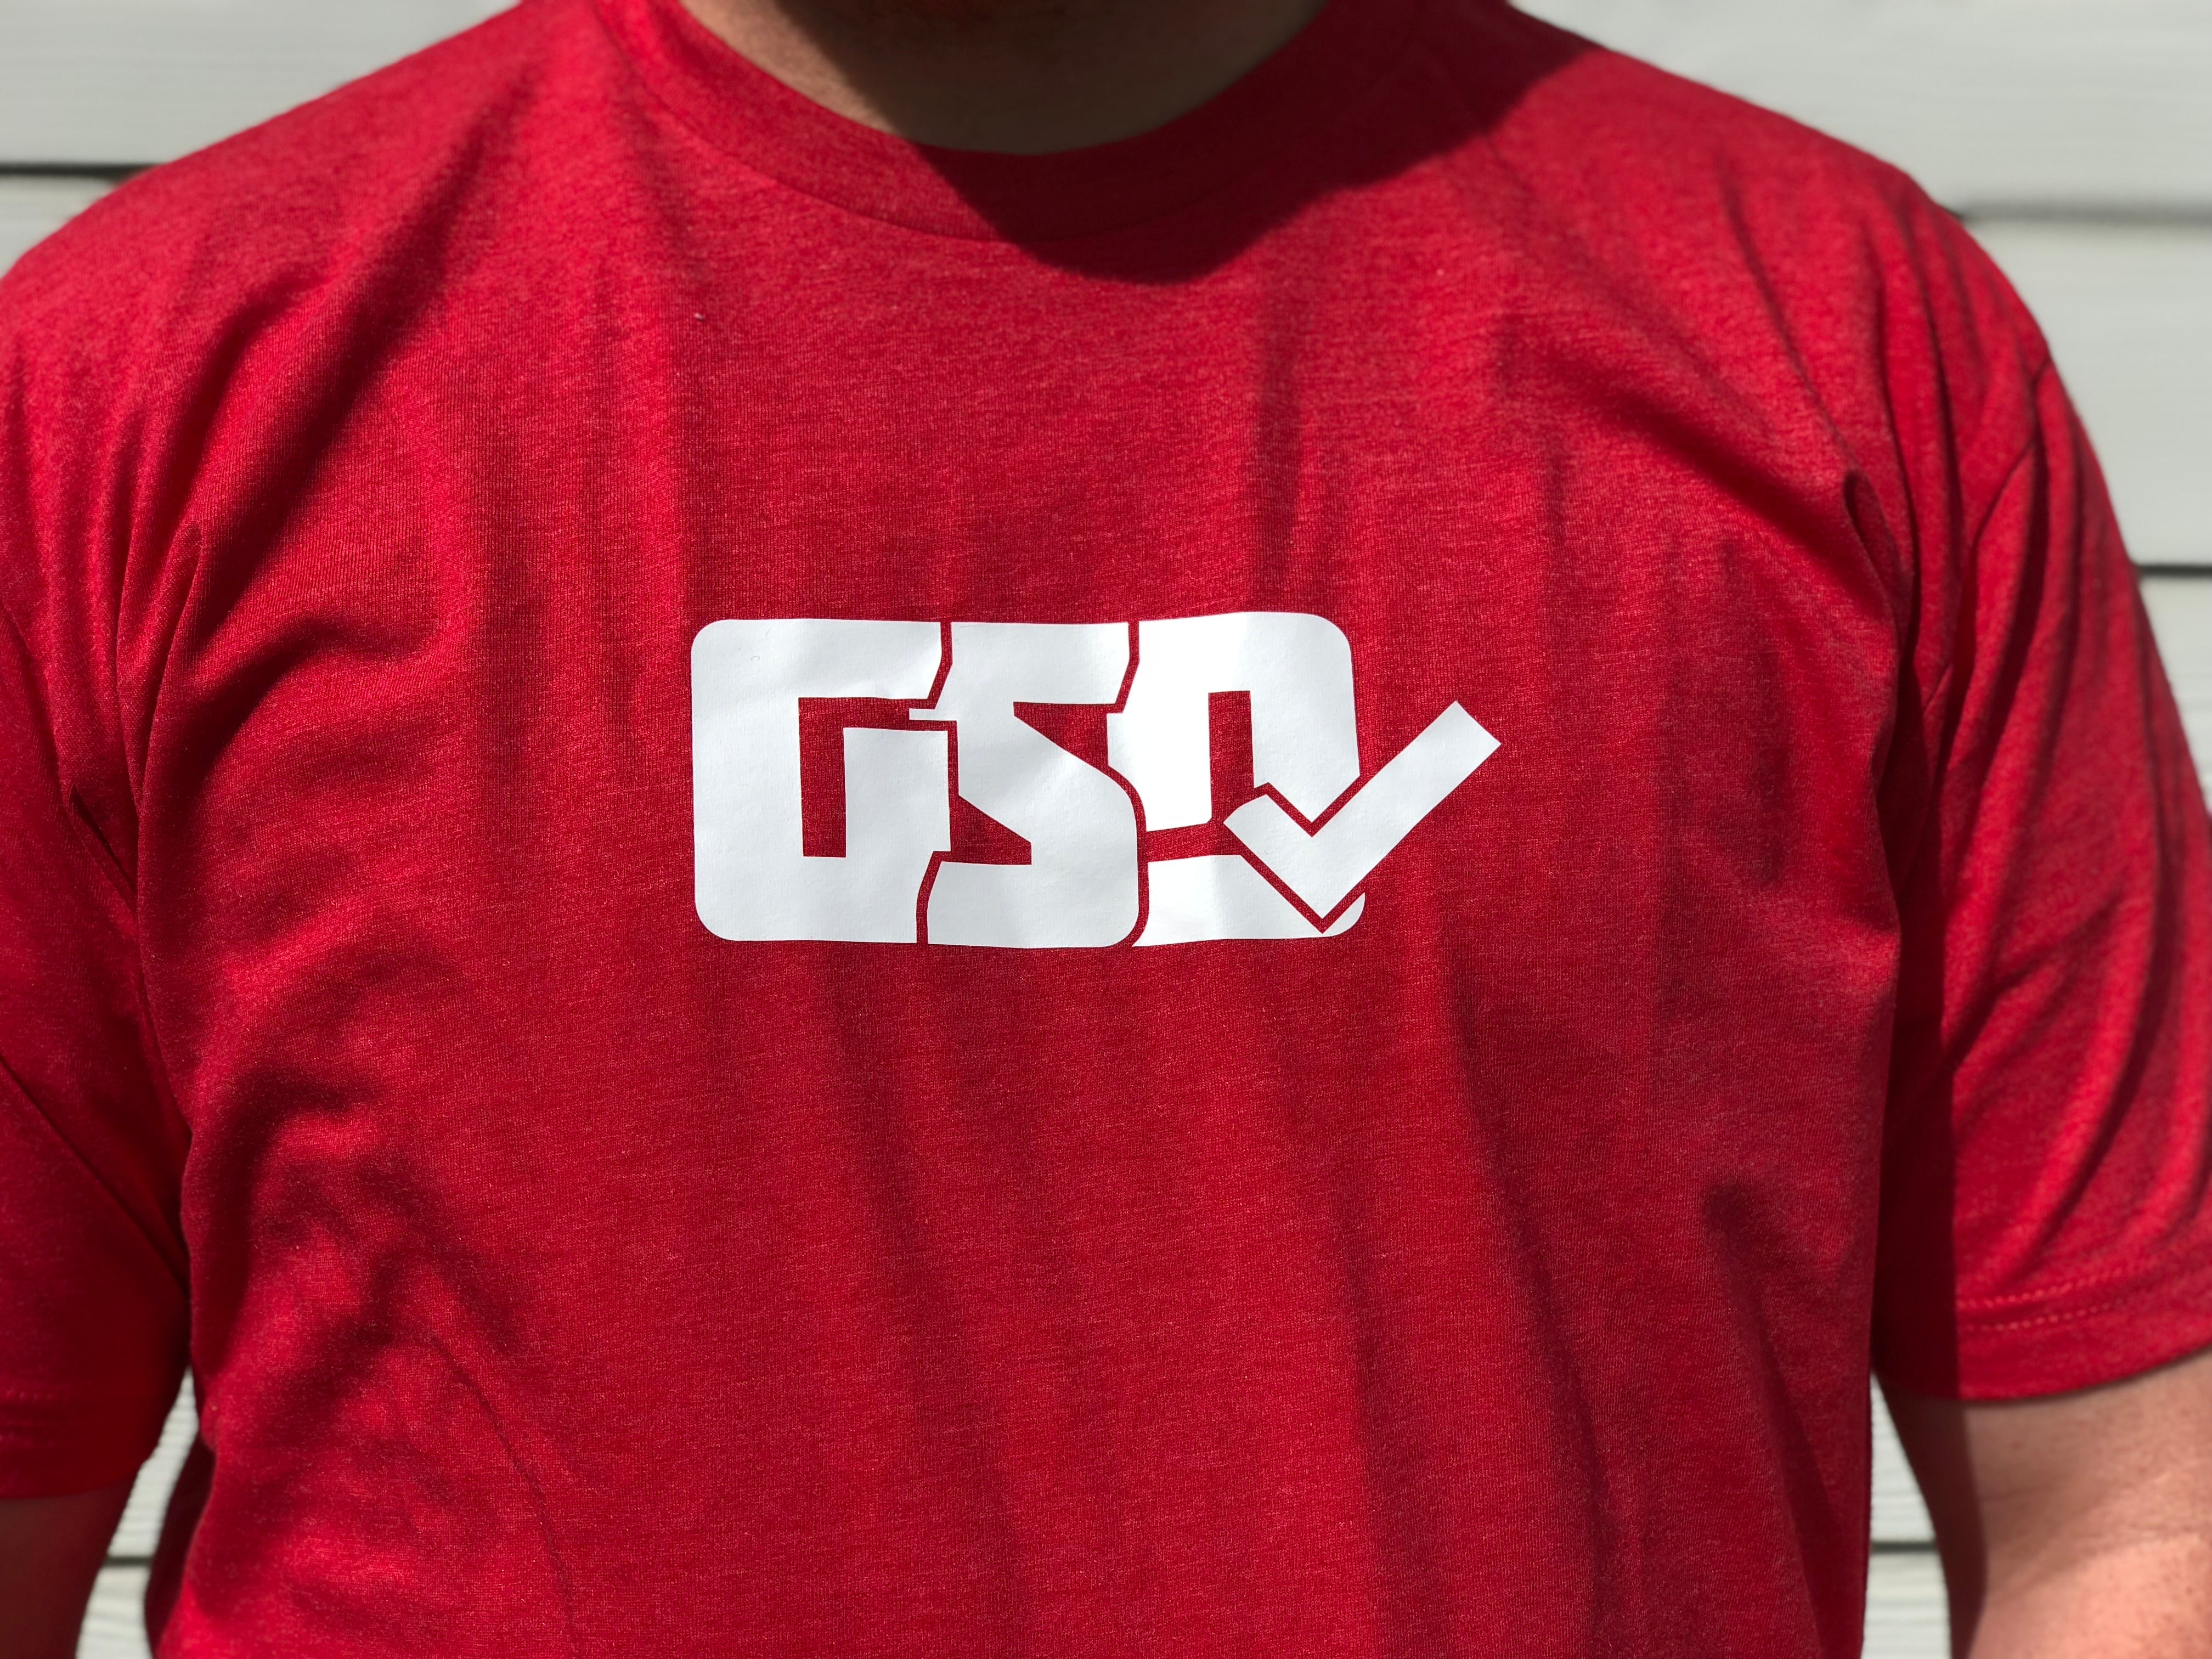 GSD T-Shirt - Red / White - “Pete Rose”